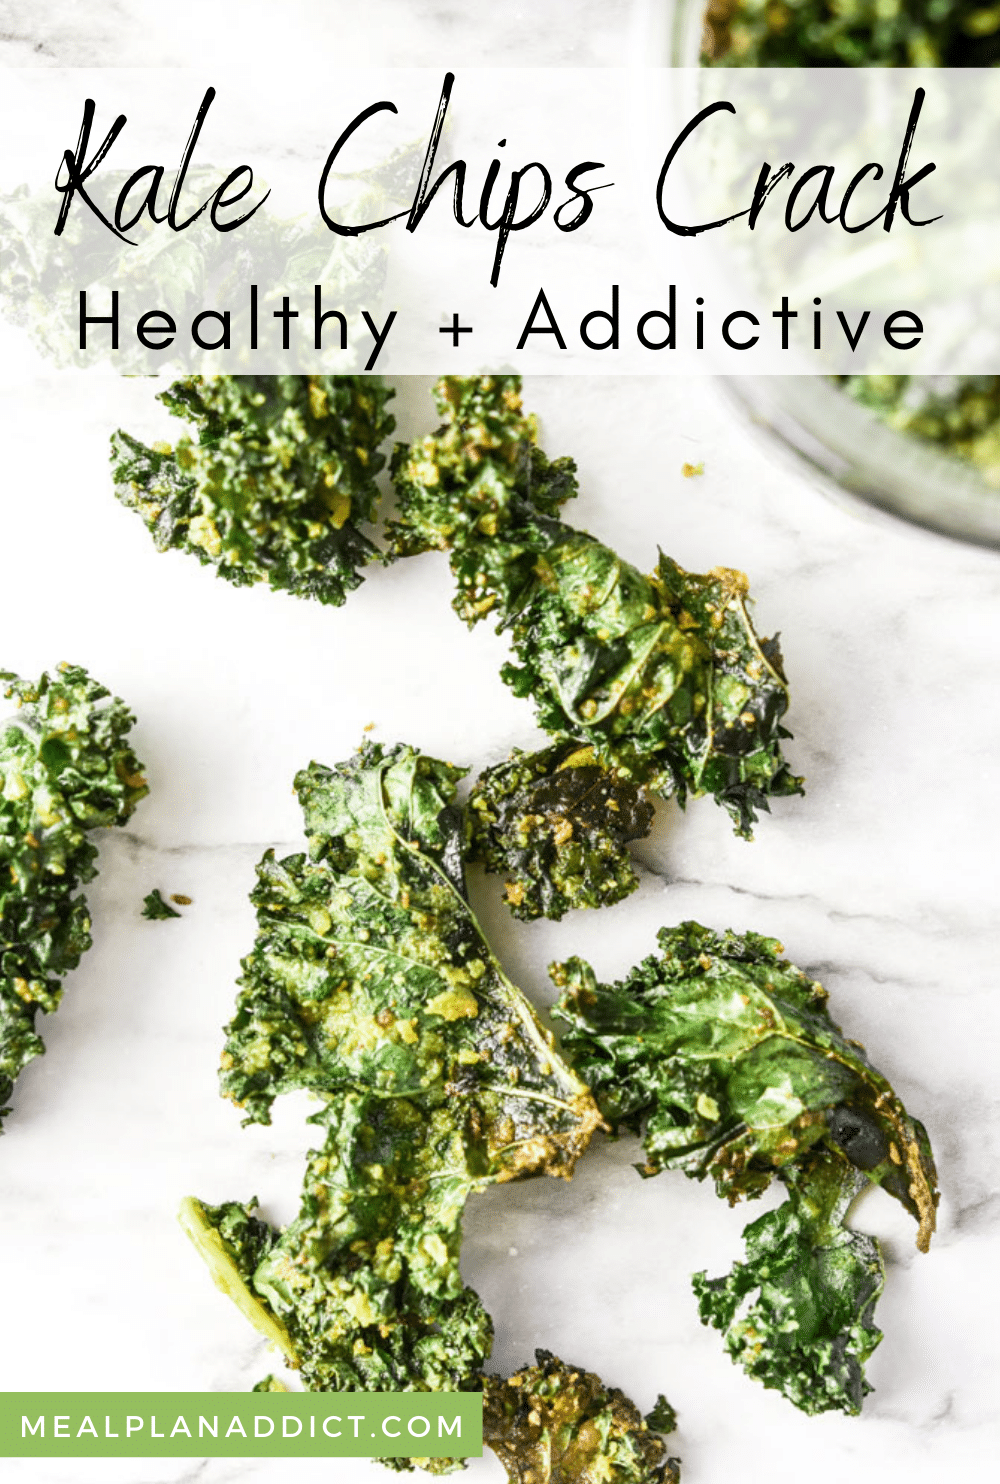 Kale Chips Crack Healthy and Addictive | Meal Plan Addict